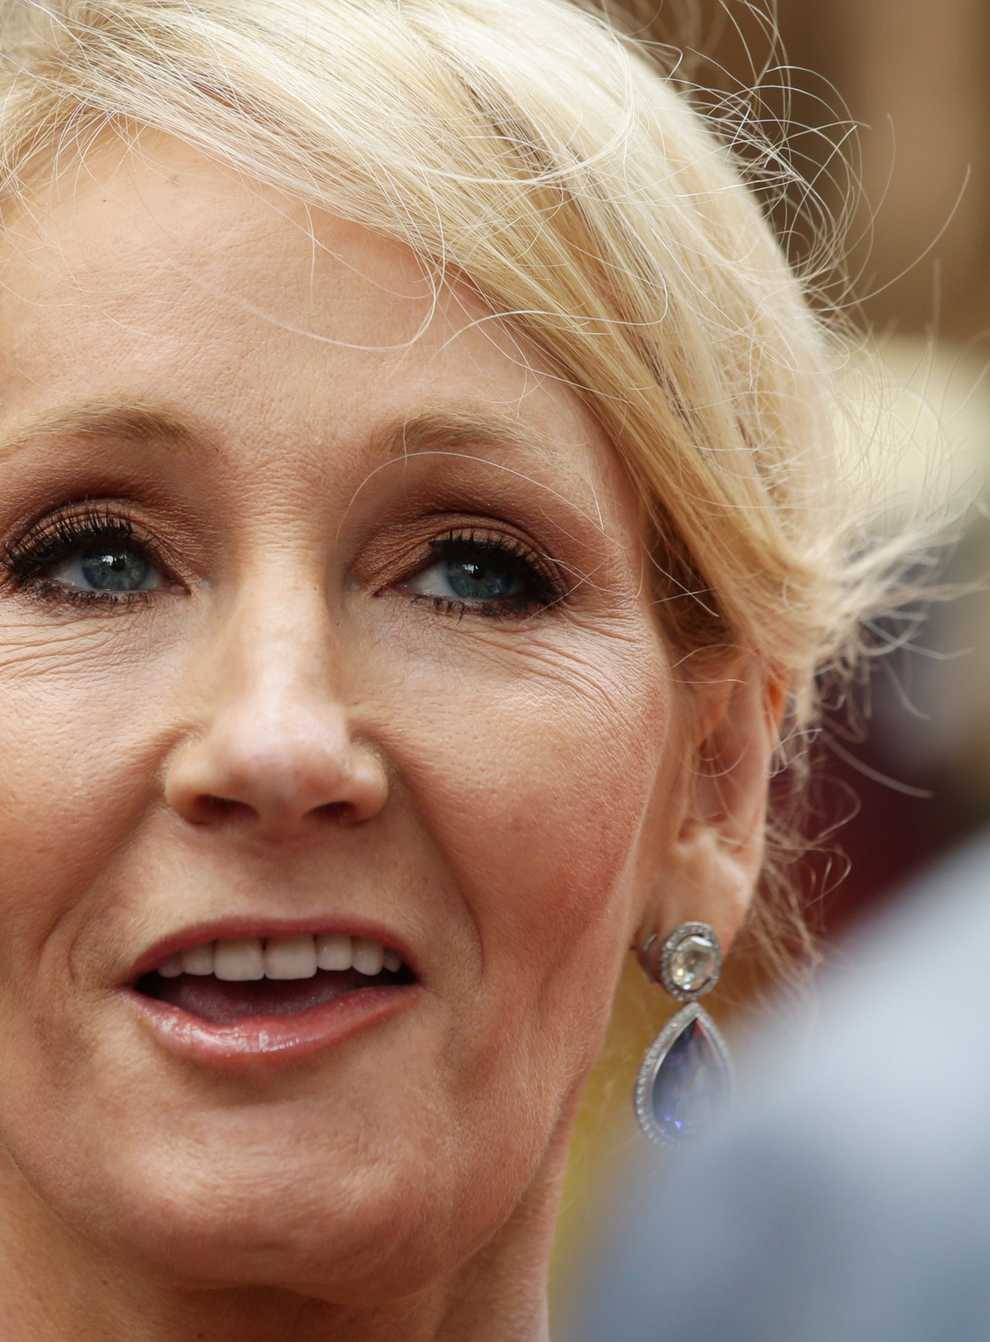 A tweet which identified JK Rowling’s Edinburgh home will not be treated as criminal, police say (Yui Mok/PA)